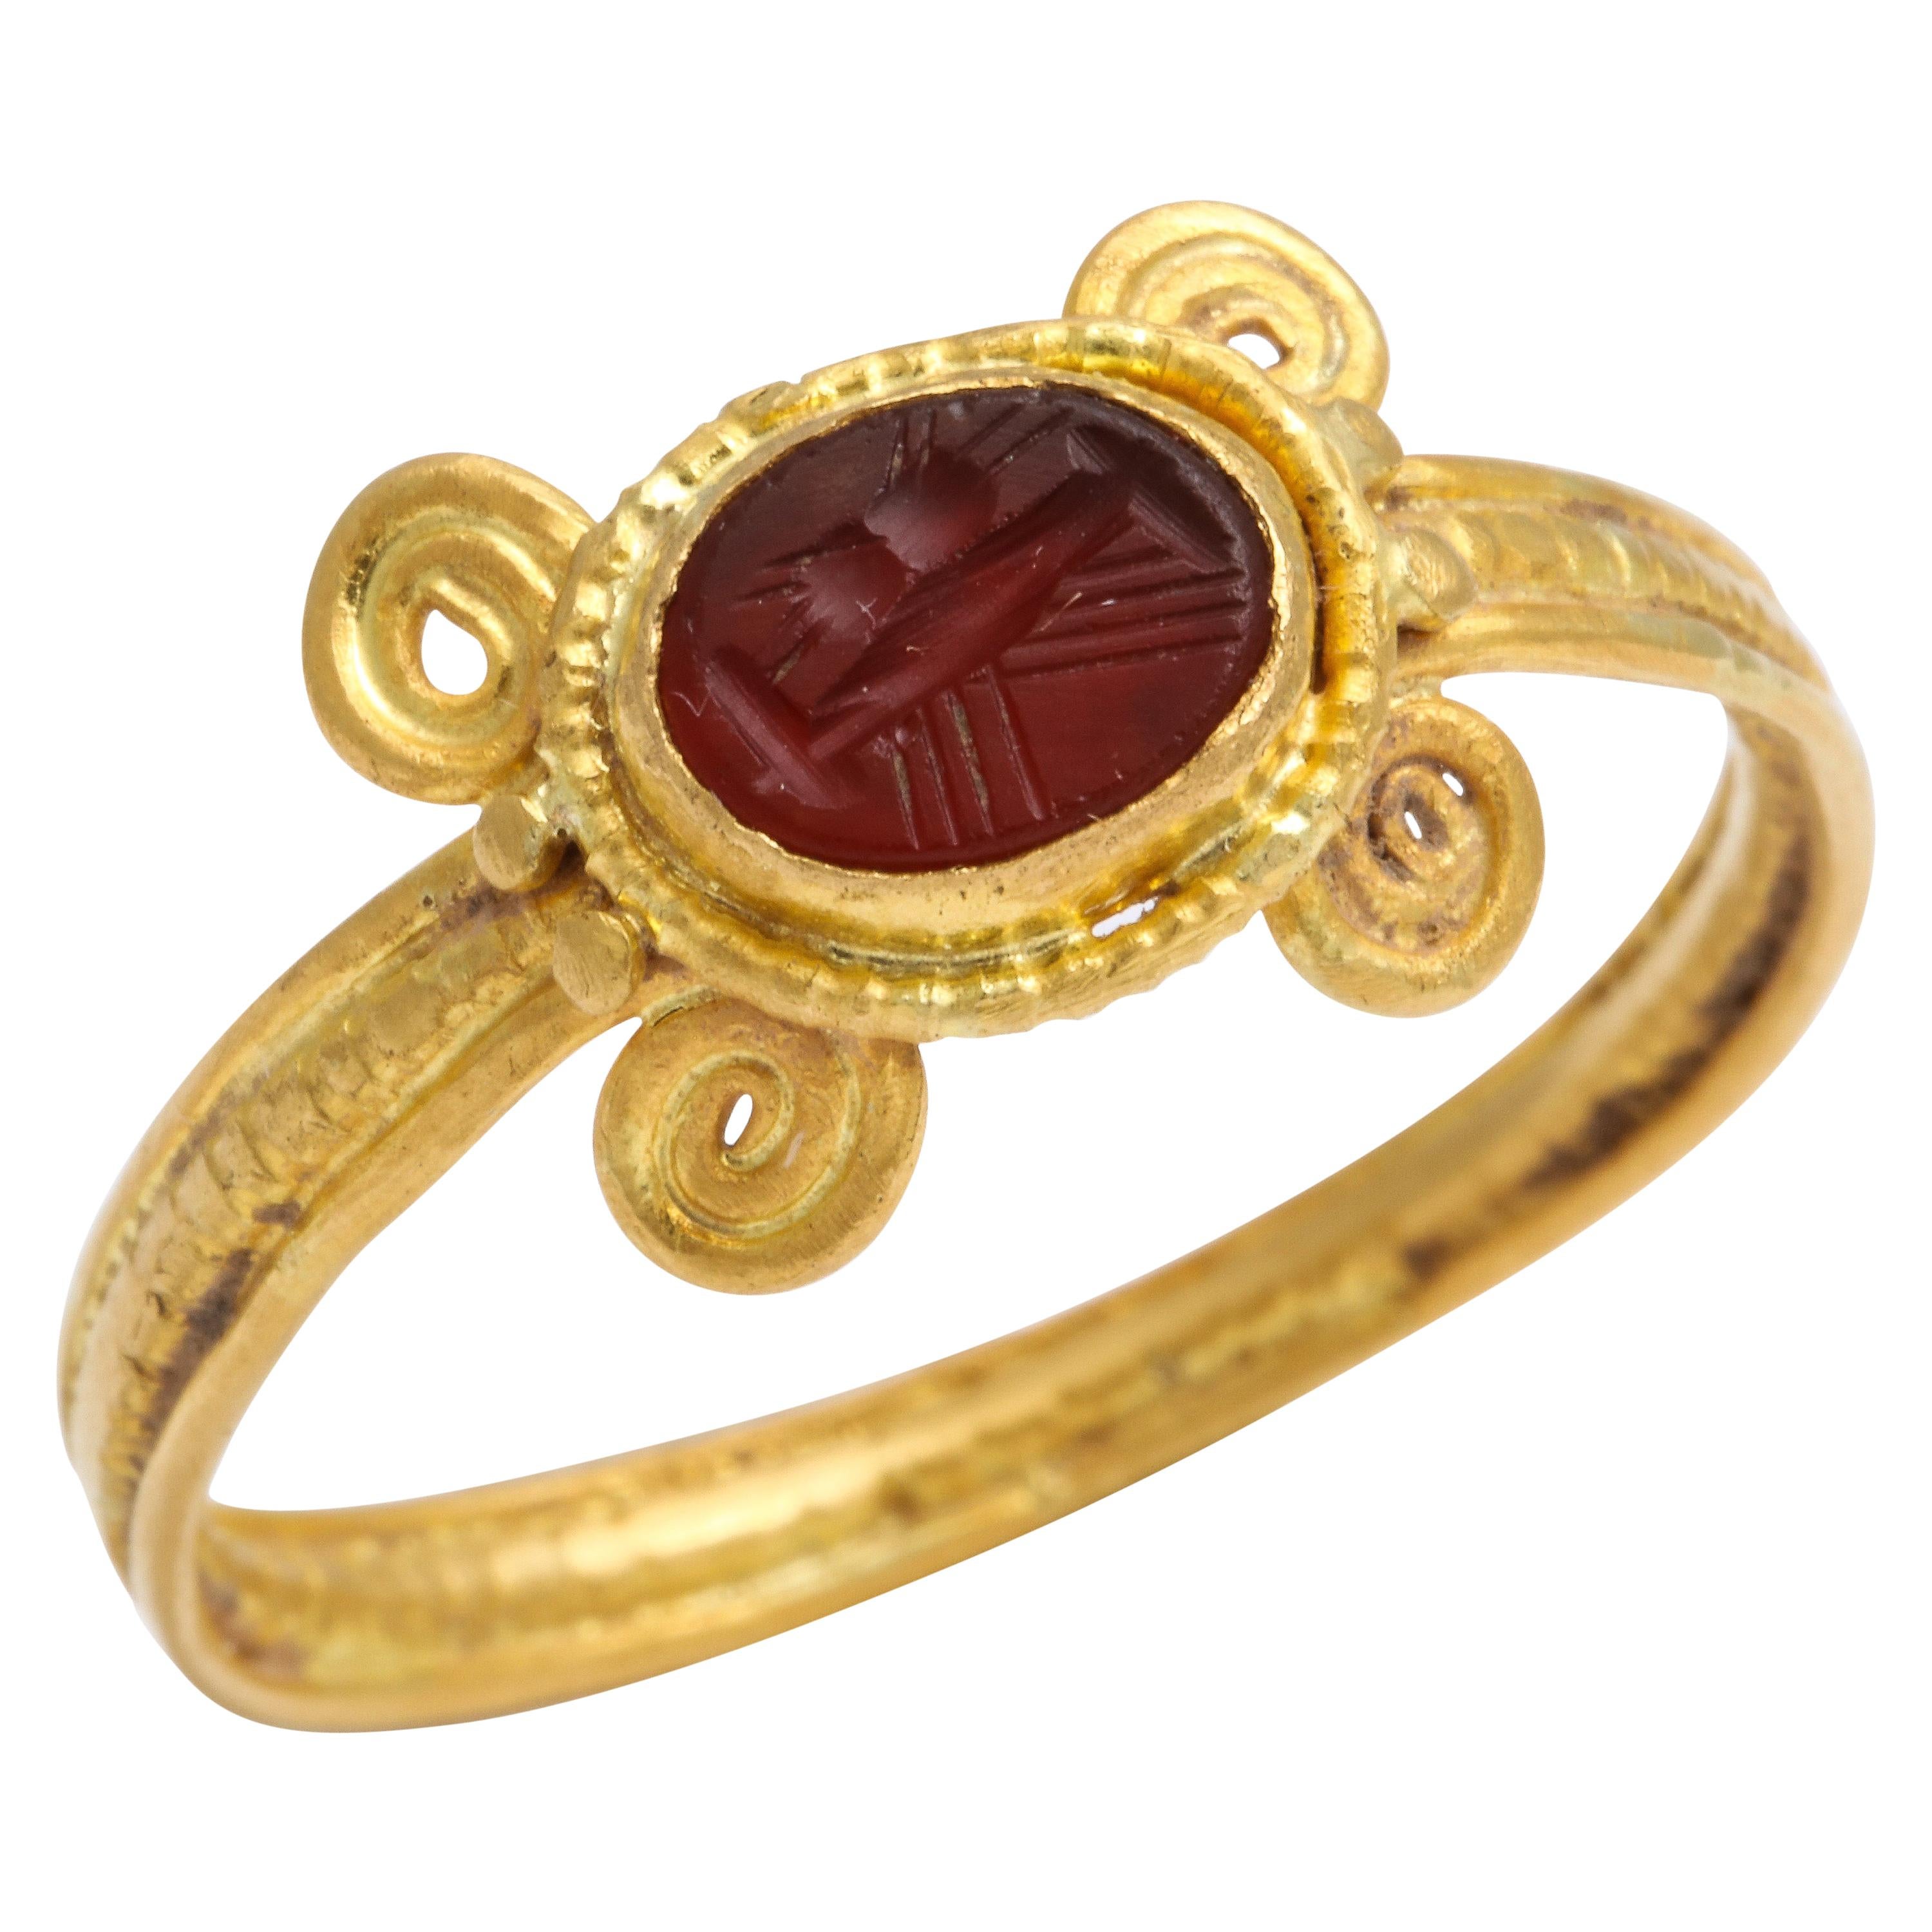 Ancient Roman Carnelian Intaglio Ring with Clasped Hands For Sale